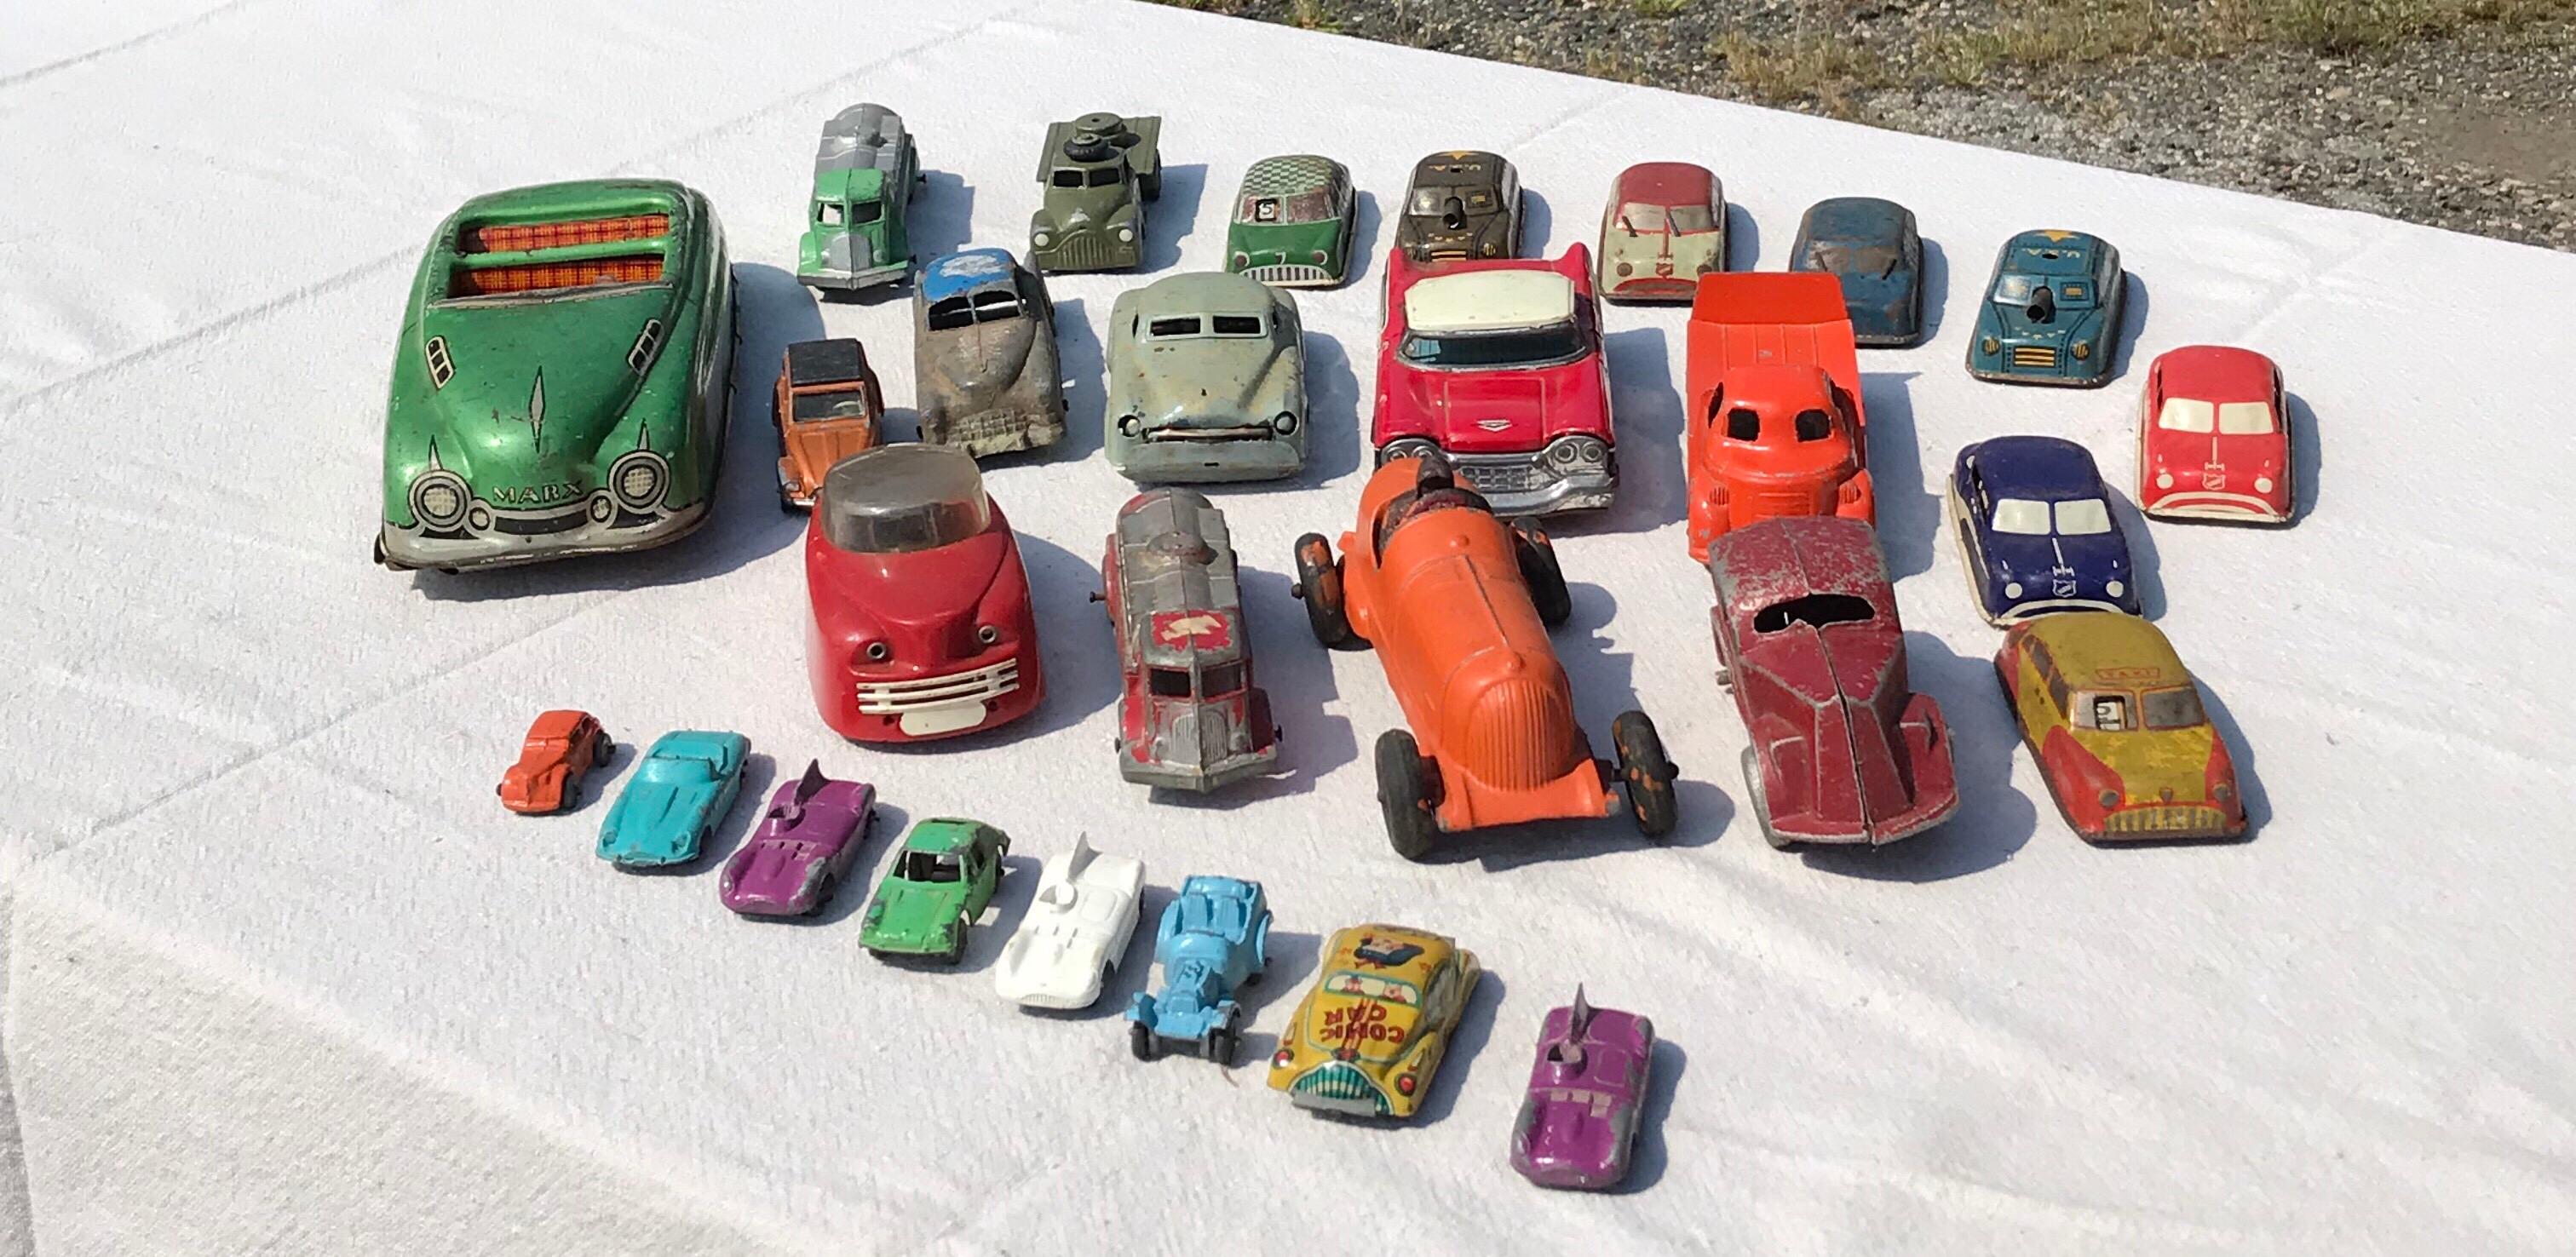 Collection of vintage toy cars. 28 total. It includes a large green tin litograph Friction Marx V89 toy convertible Car. An iron Hubley roadster in orange and a 1950s futuristic car in plastic. All push cars to play with that have rotating wheels.